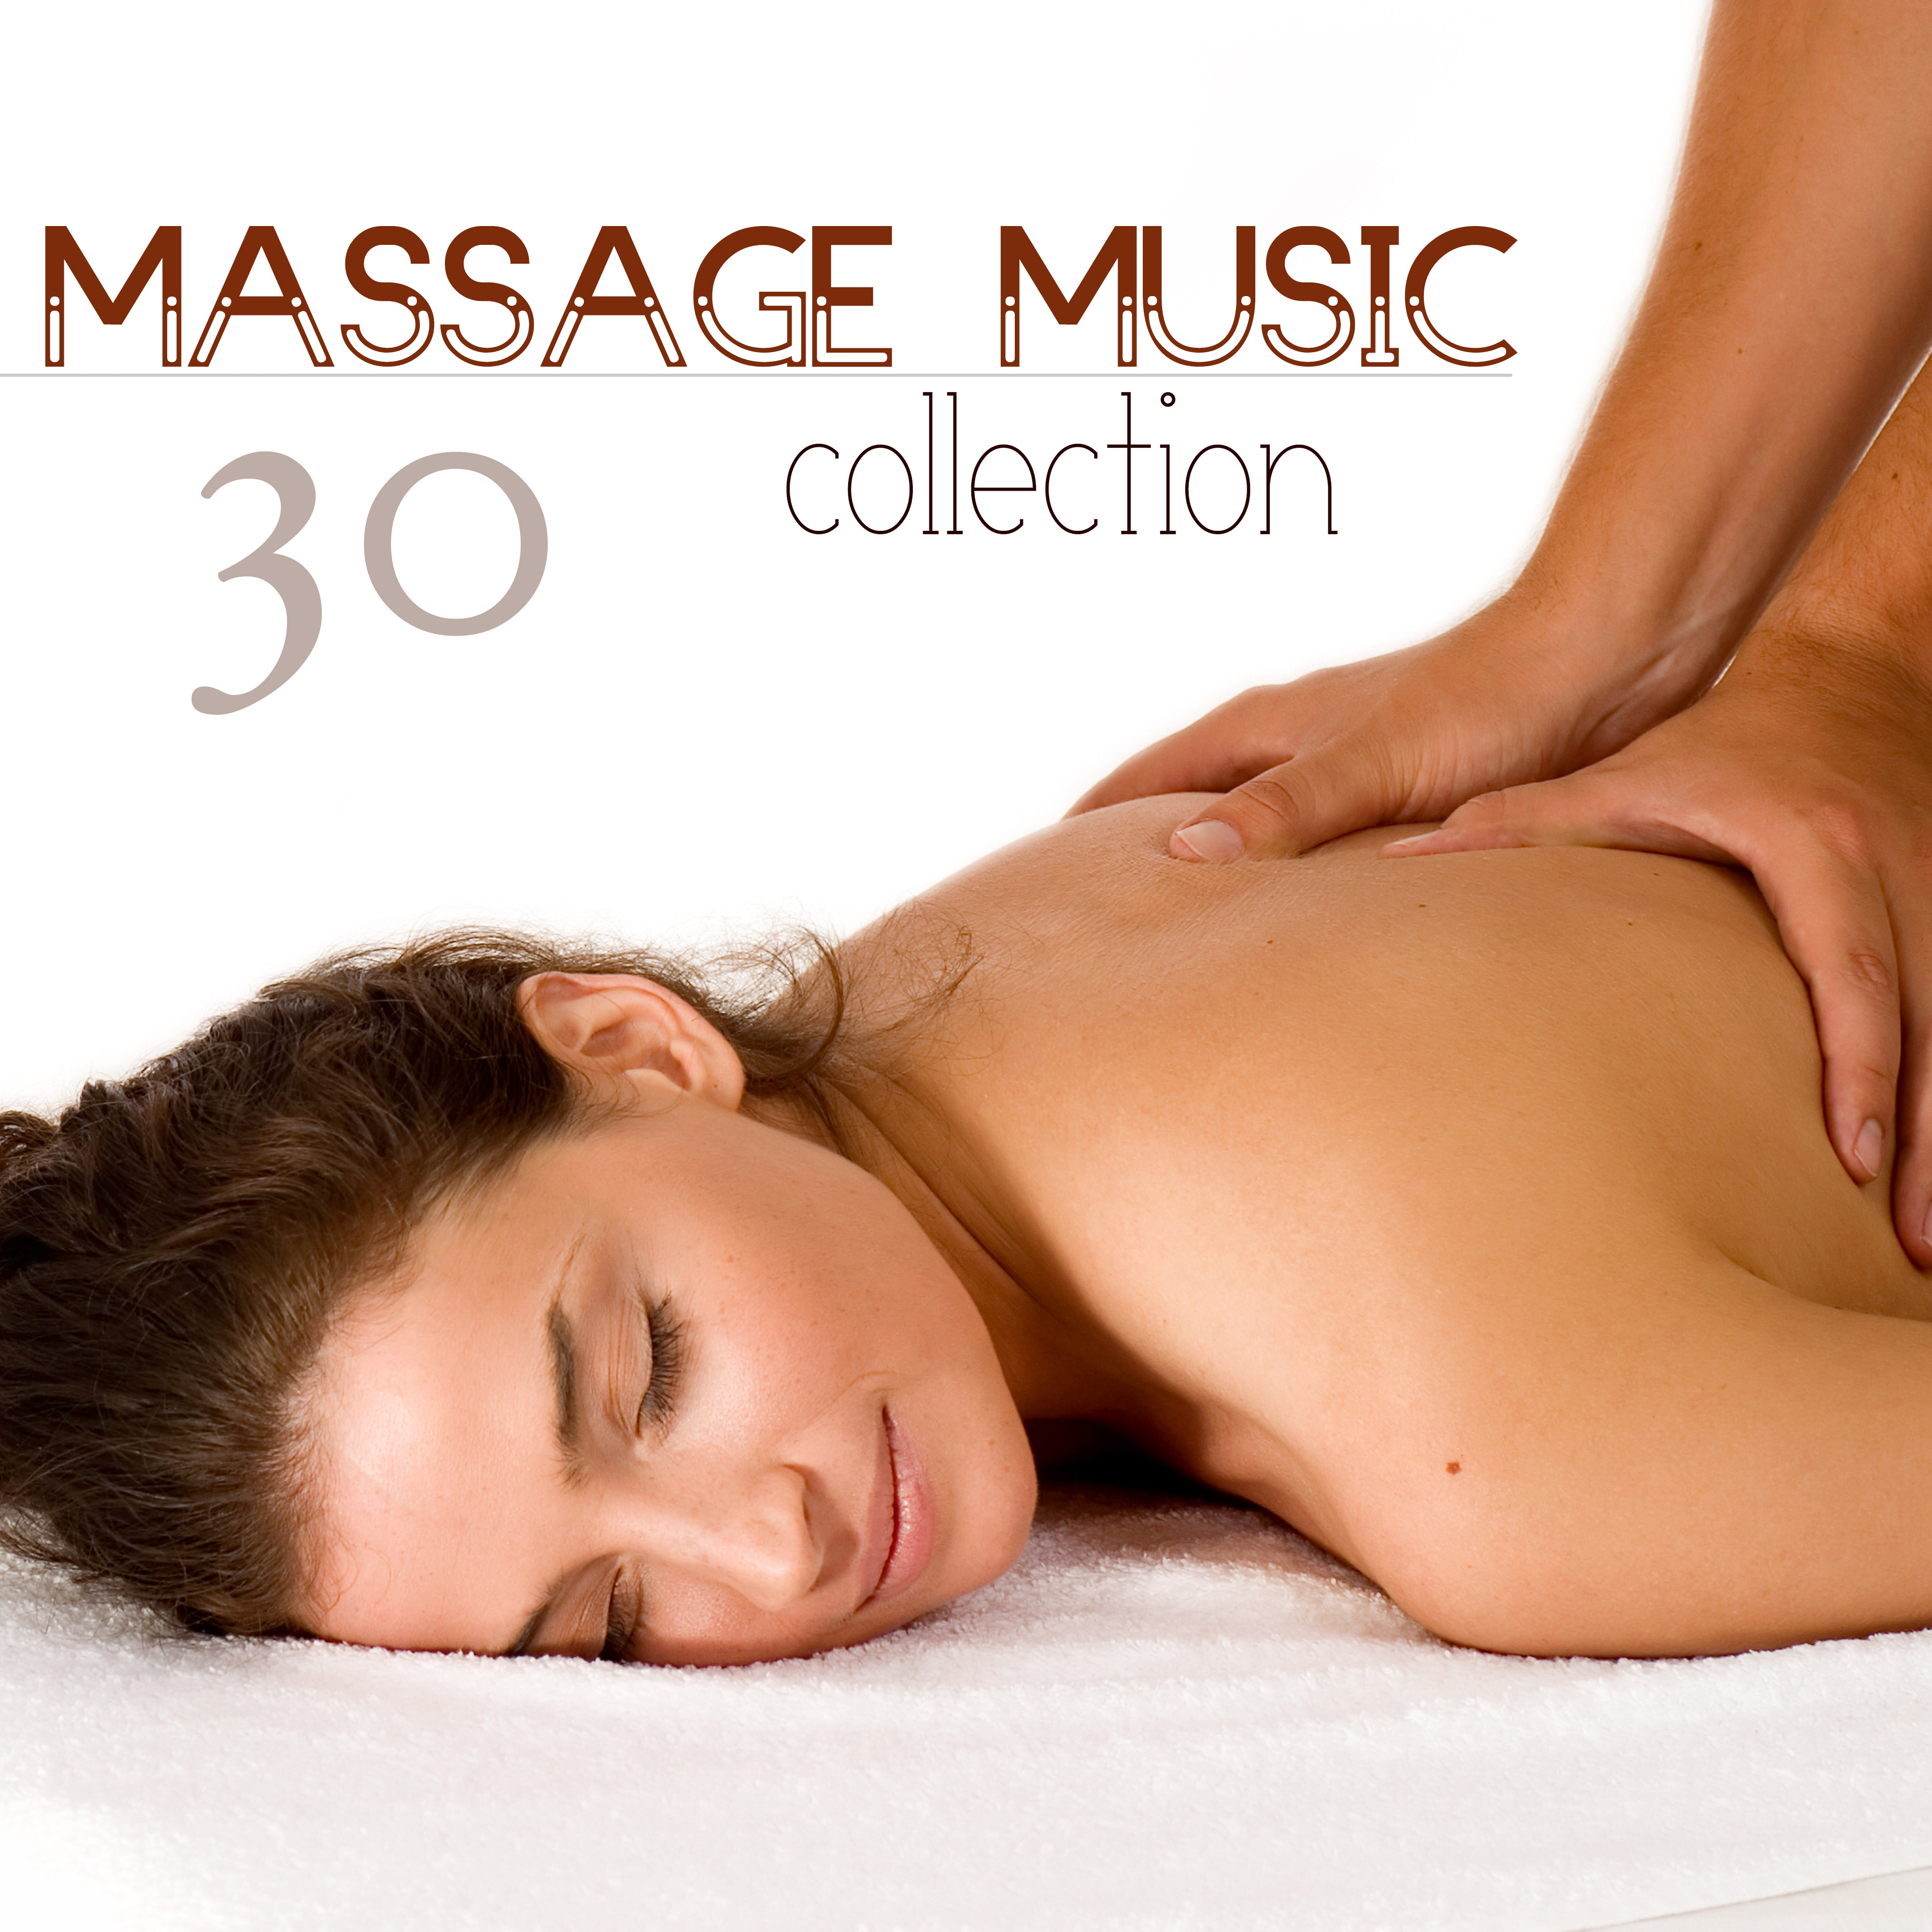 Massage Music Collection - Best Relaxing Spa Sounds, Nature Songs to Relax at Home